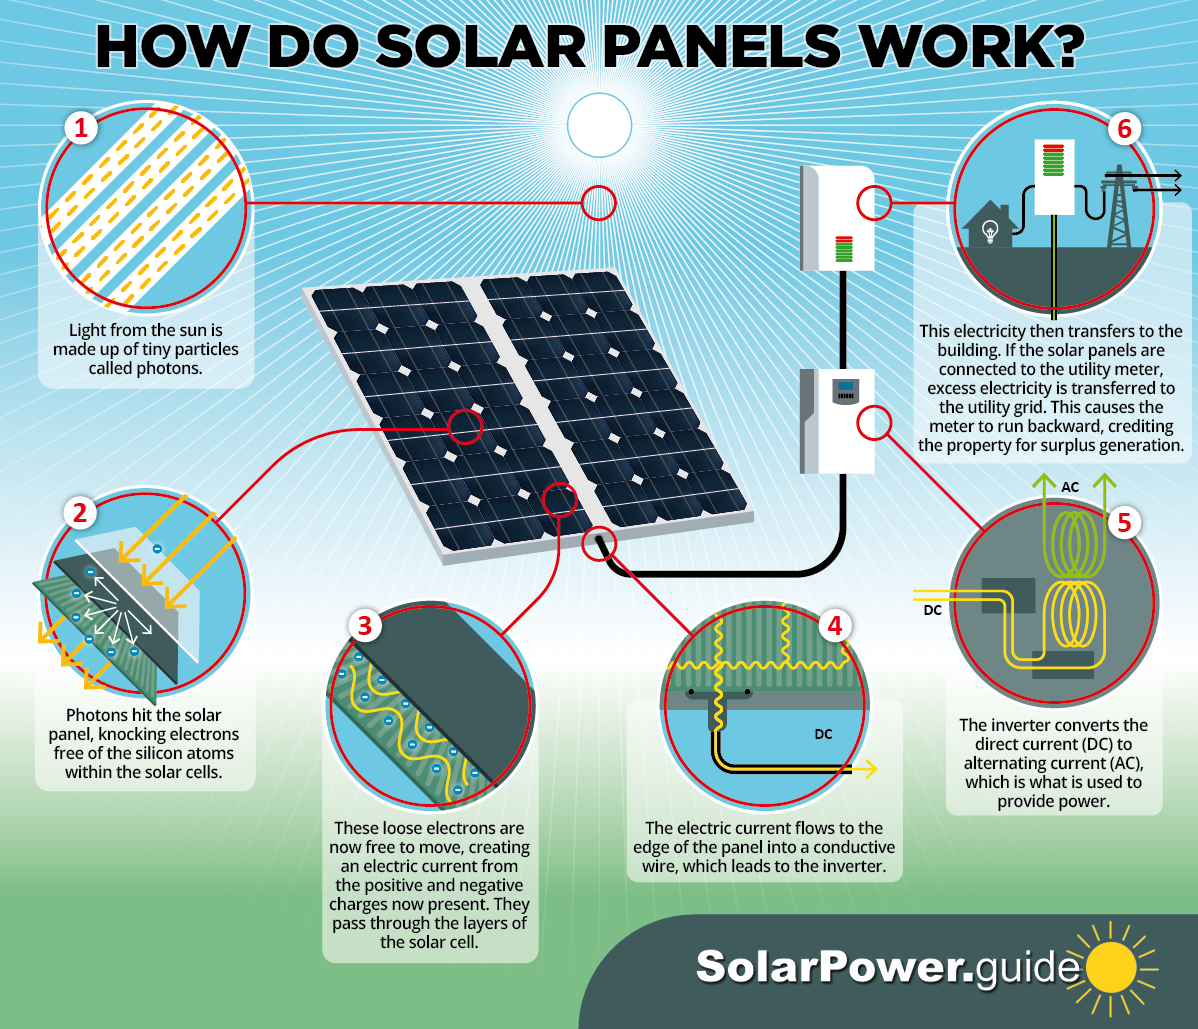 How Do Solar Panels Work? - SolarPower.guide Solar Energy Insights - Infographic